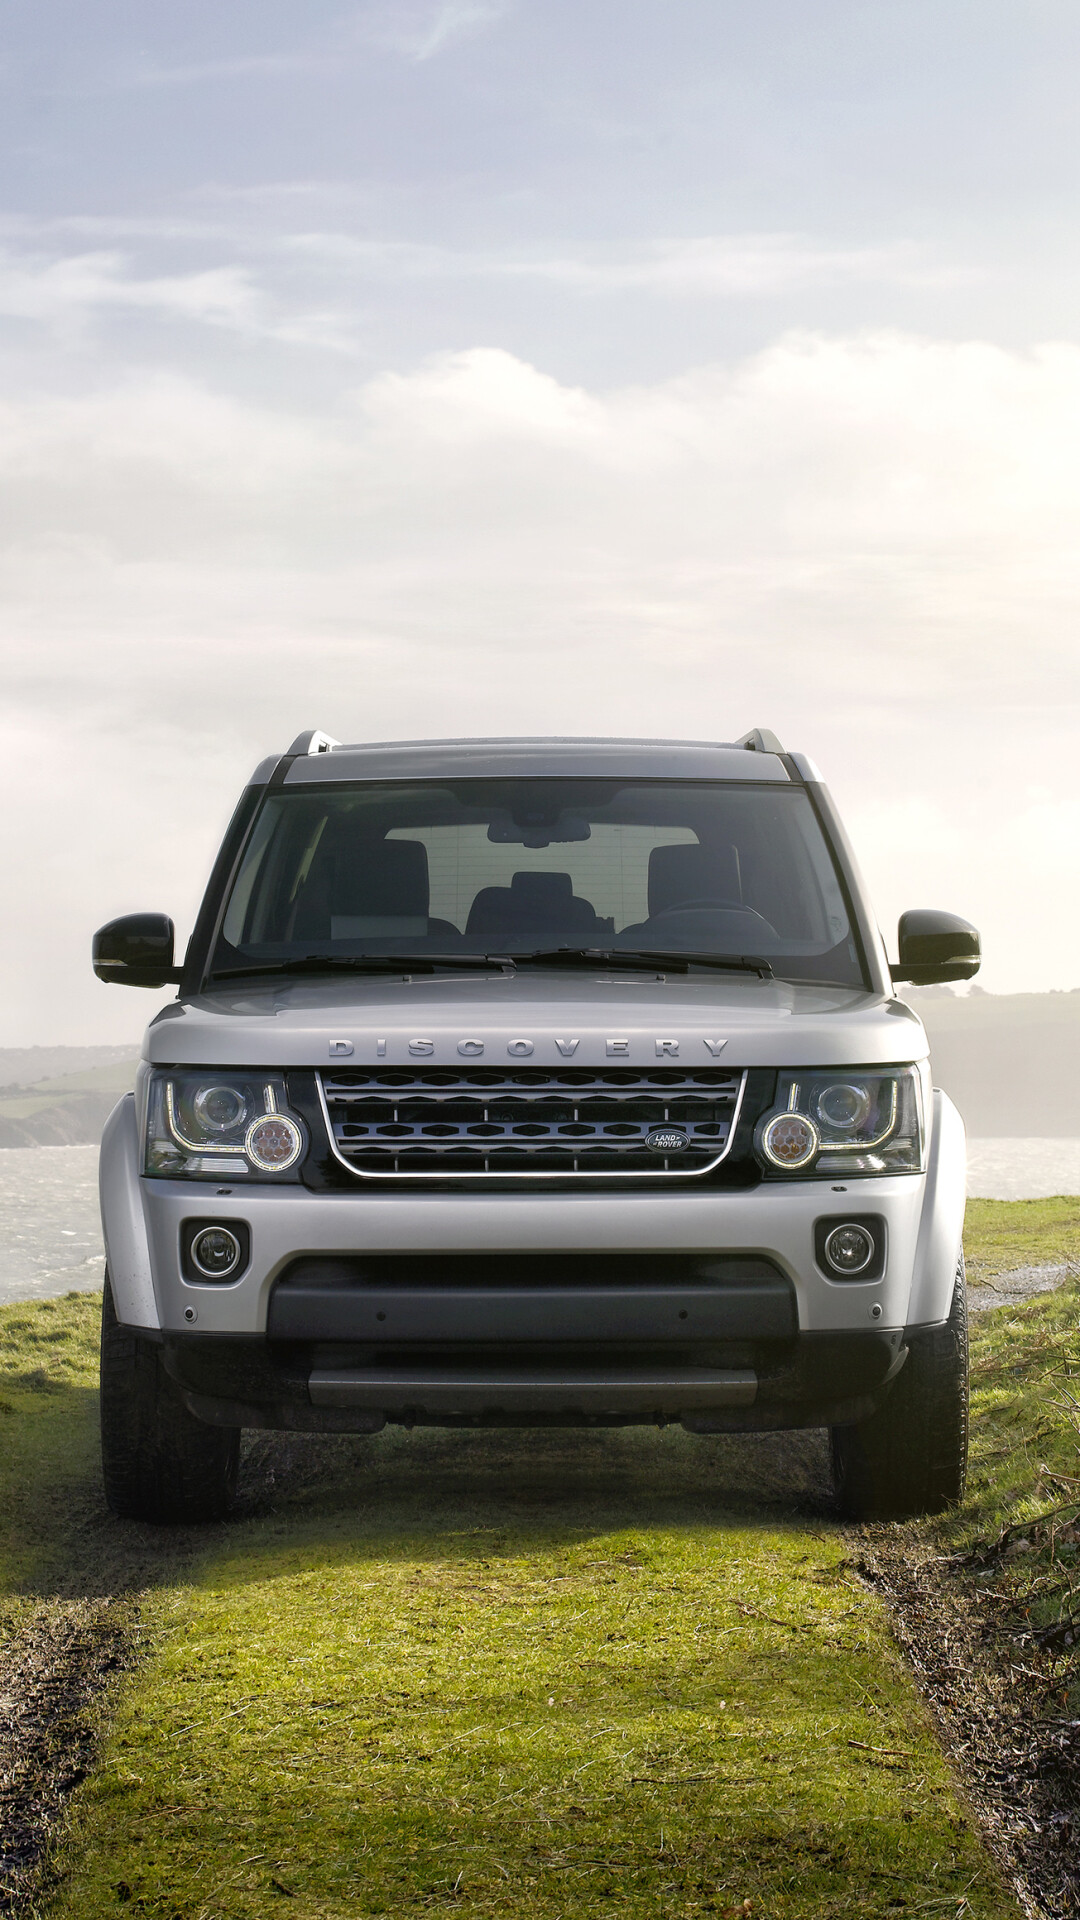 Land Rover: The second-generation Discovery was Introduced in 2004. 1080x1920 Full HD Wallpaper.